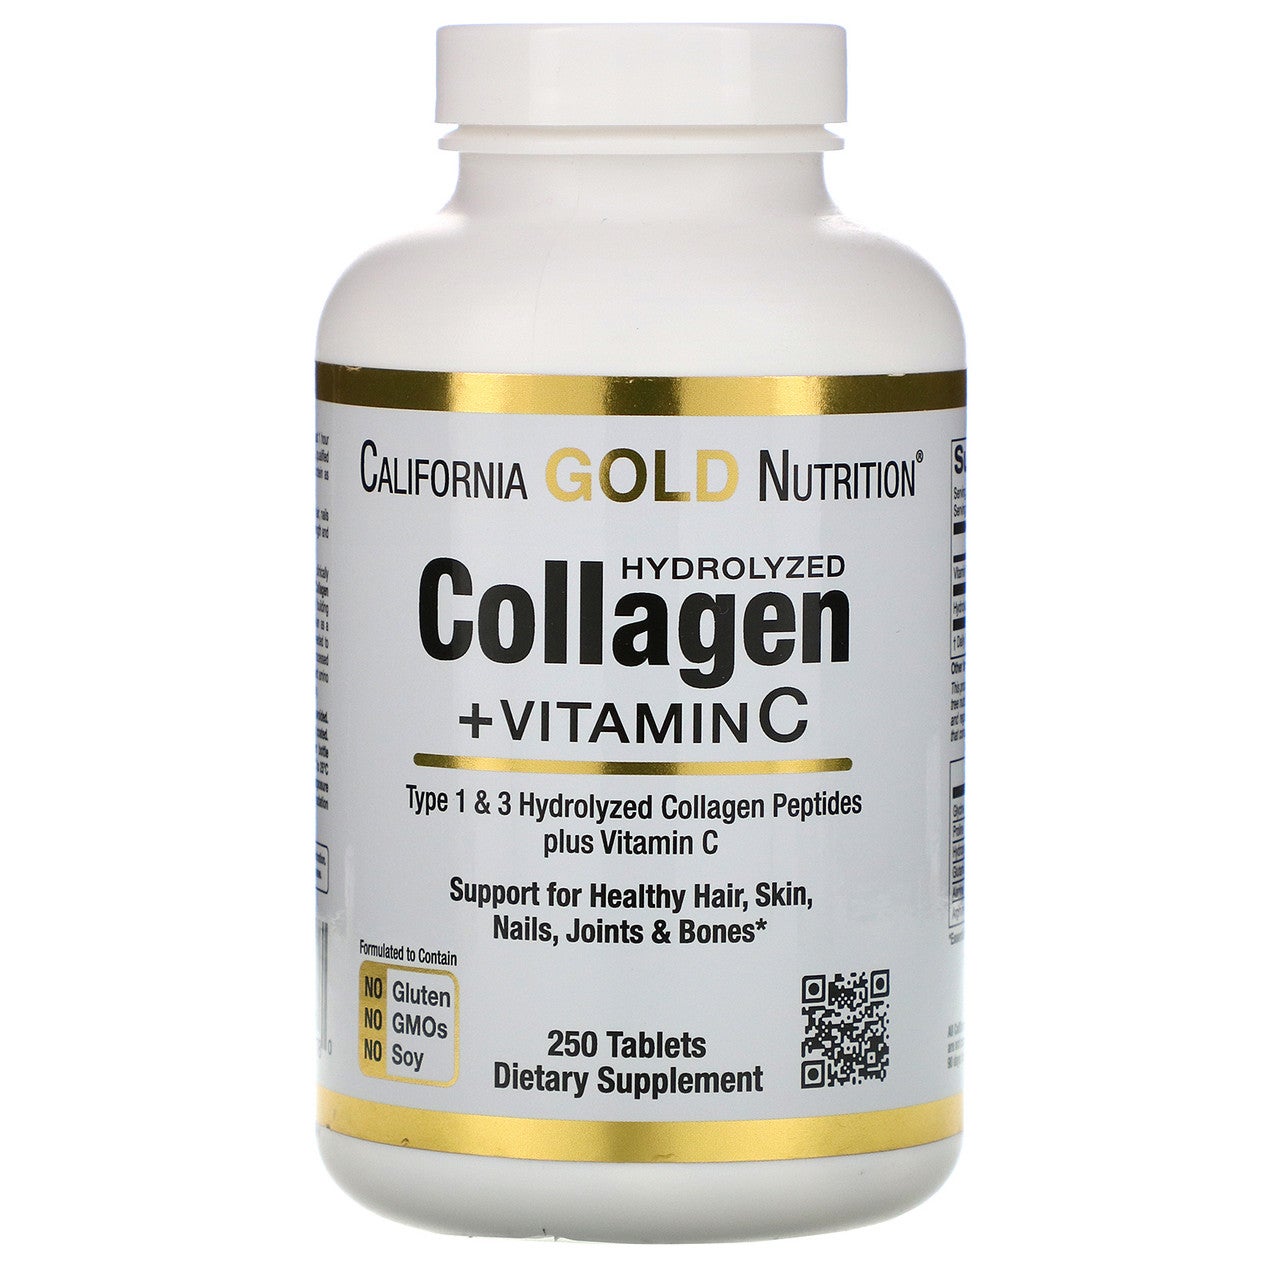 CALIFORNIA GOLD NUTRITION Hydrolyzed Collagen Type 1 and 3 Peptides + Vitamin C, 250 Tablets